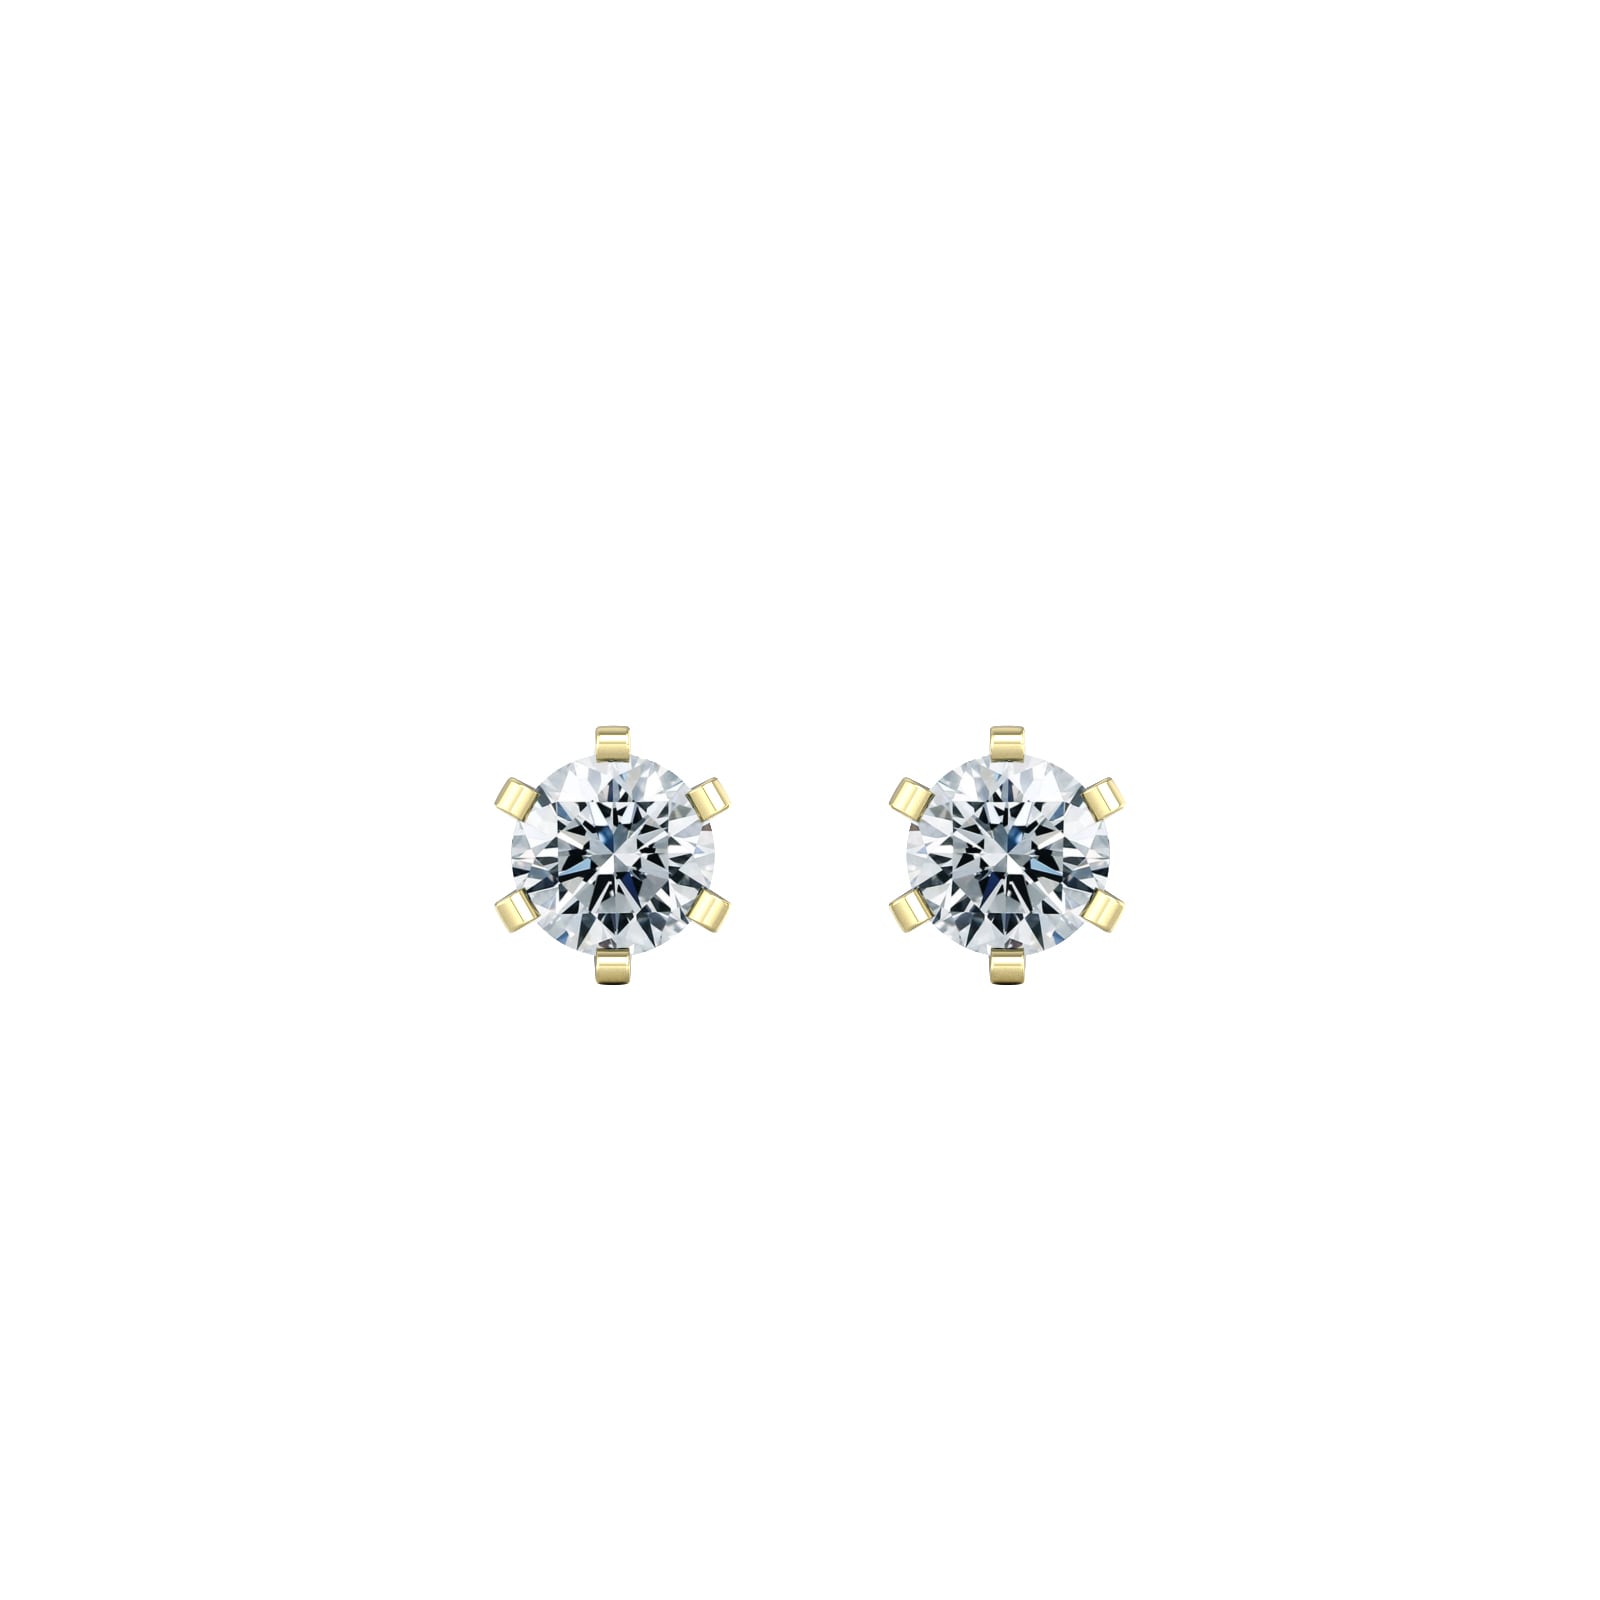 9ct Yellow Gold 0.25cttw Solitaire Diamond Stud Earrings